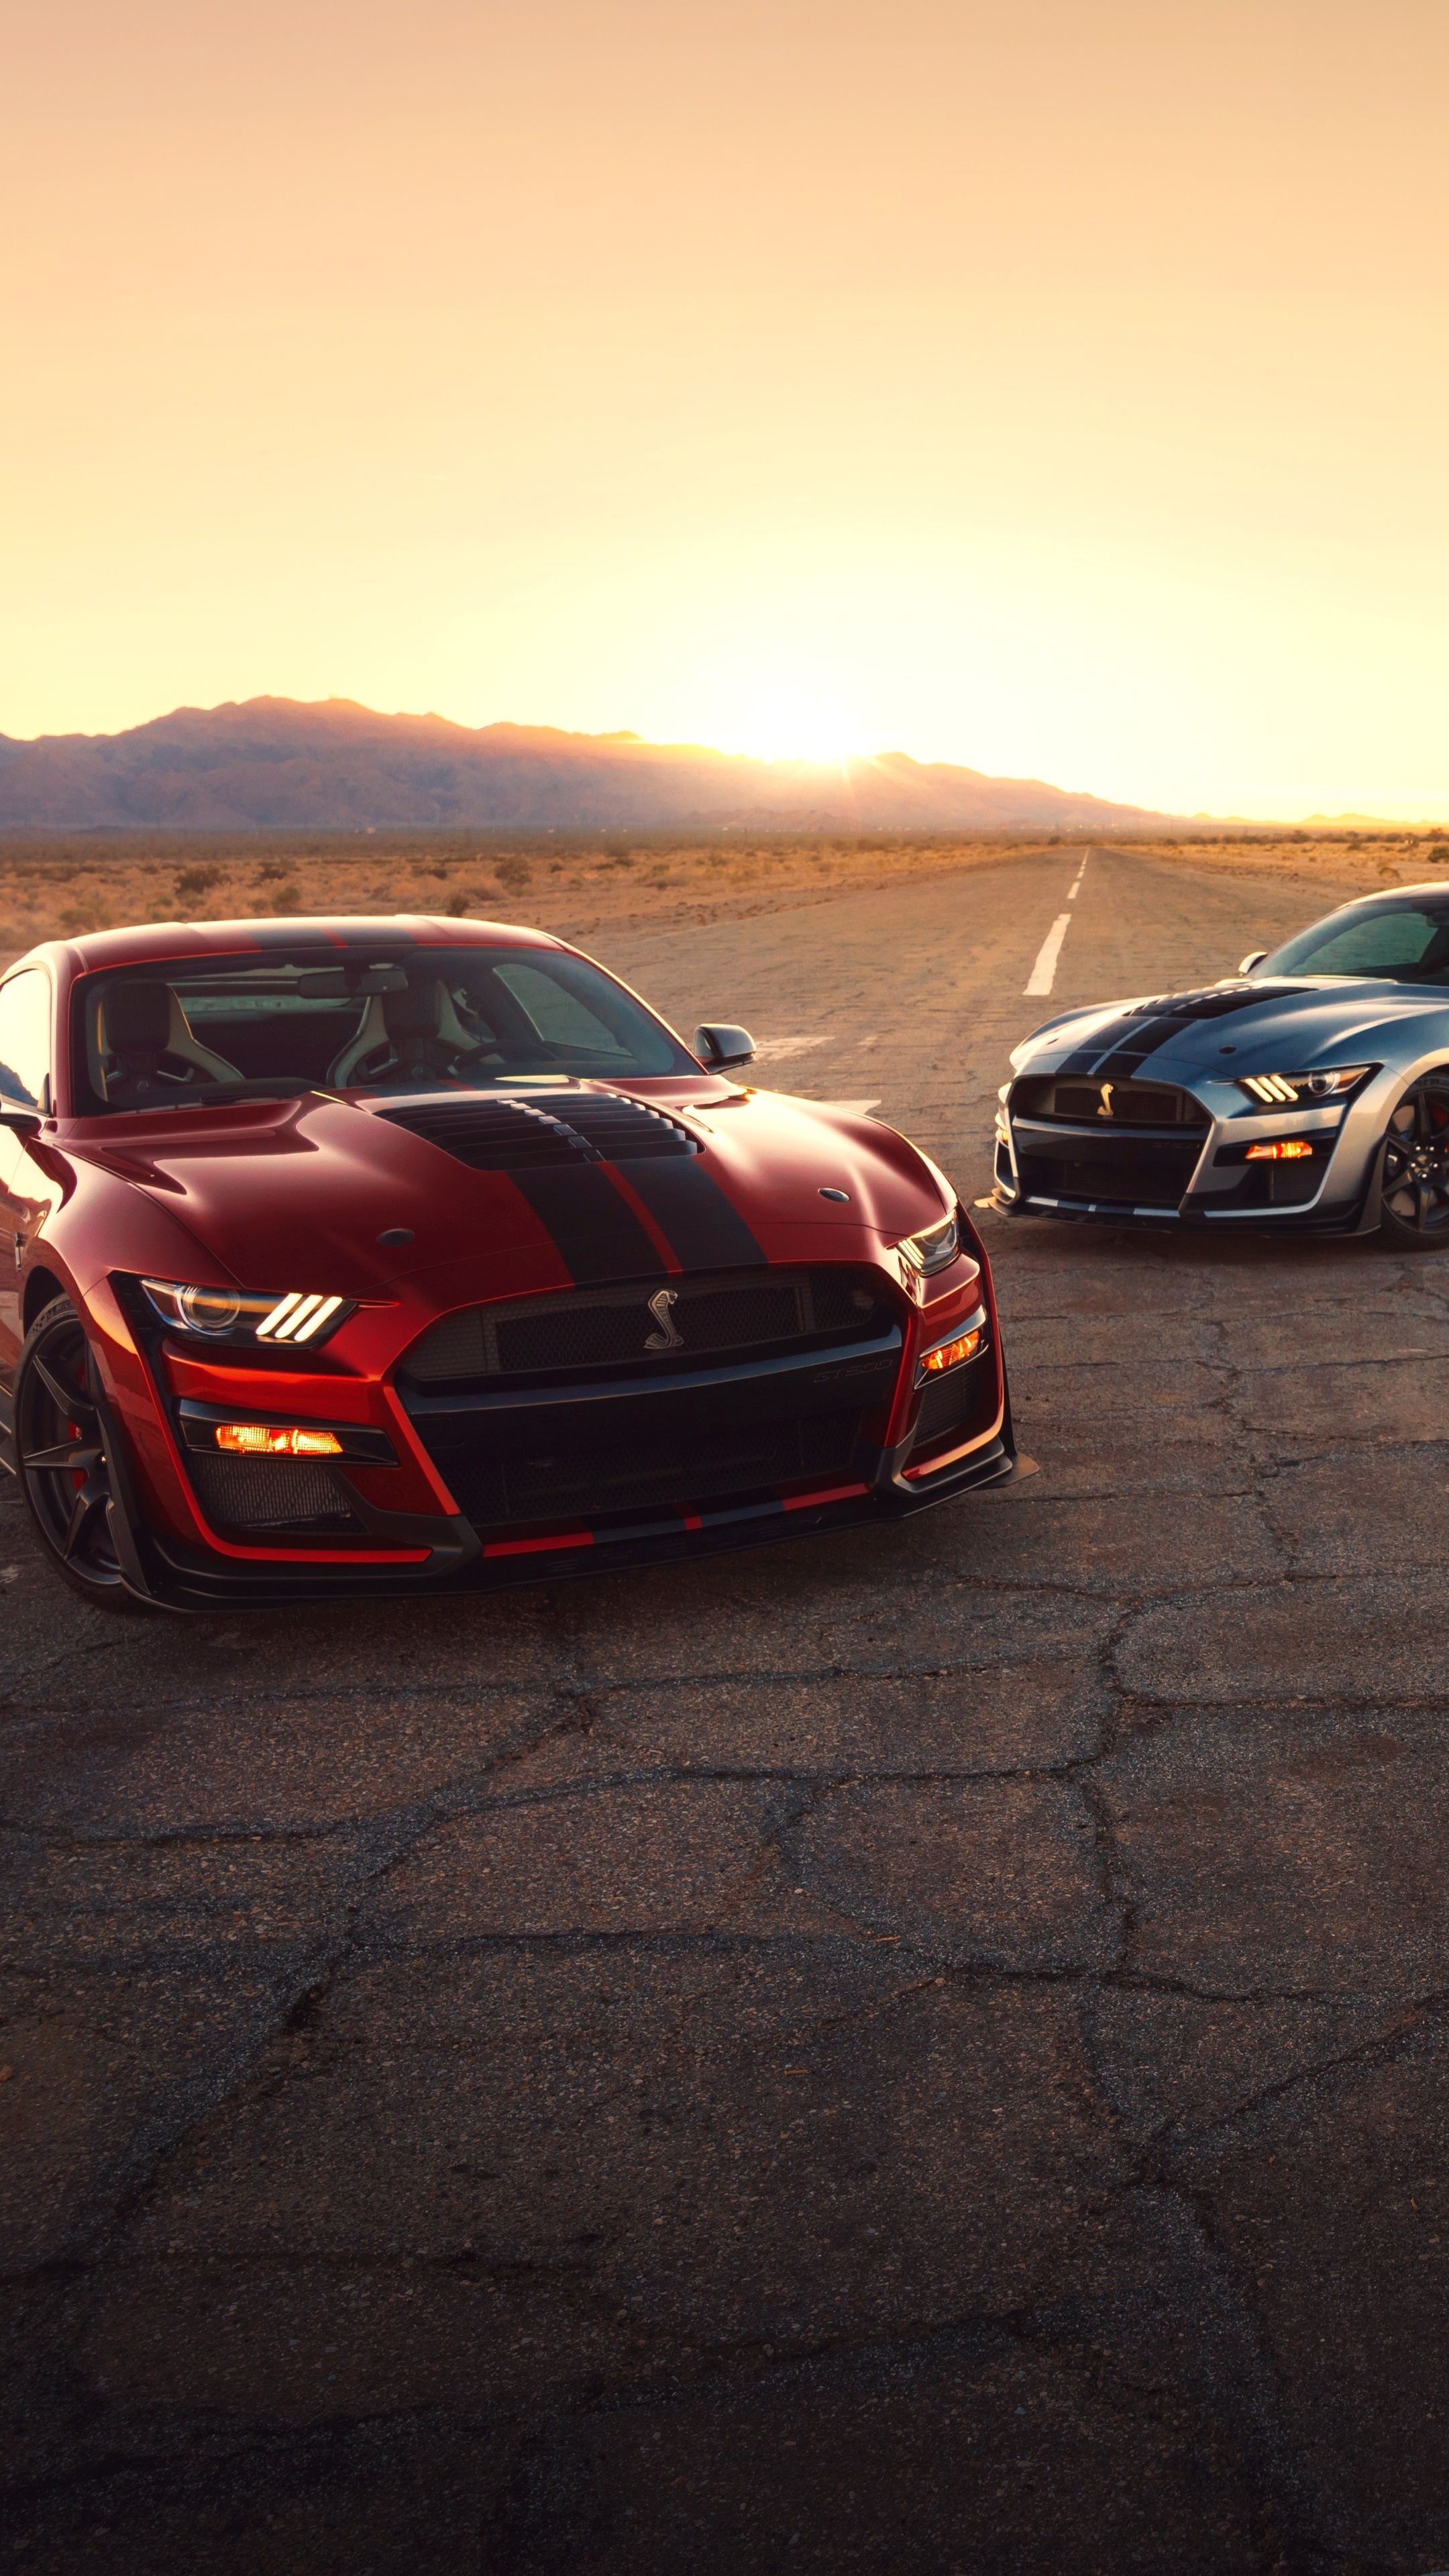 GT500 Auto, Ford Mustang Shelby GT500, Xperia wallpaper, 2160x3840 4K Handy